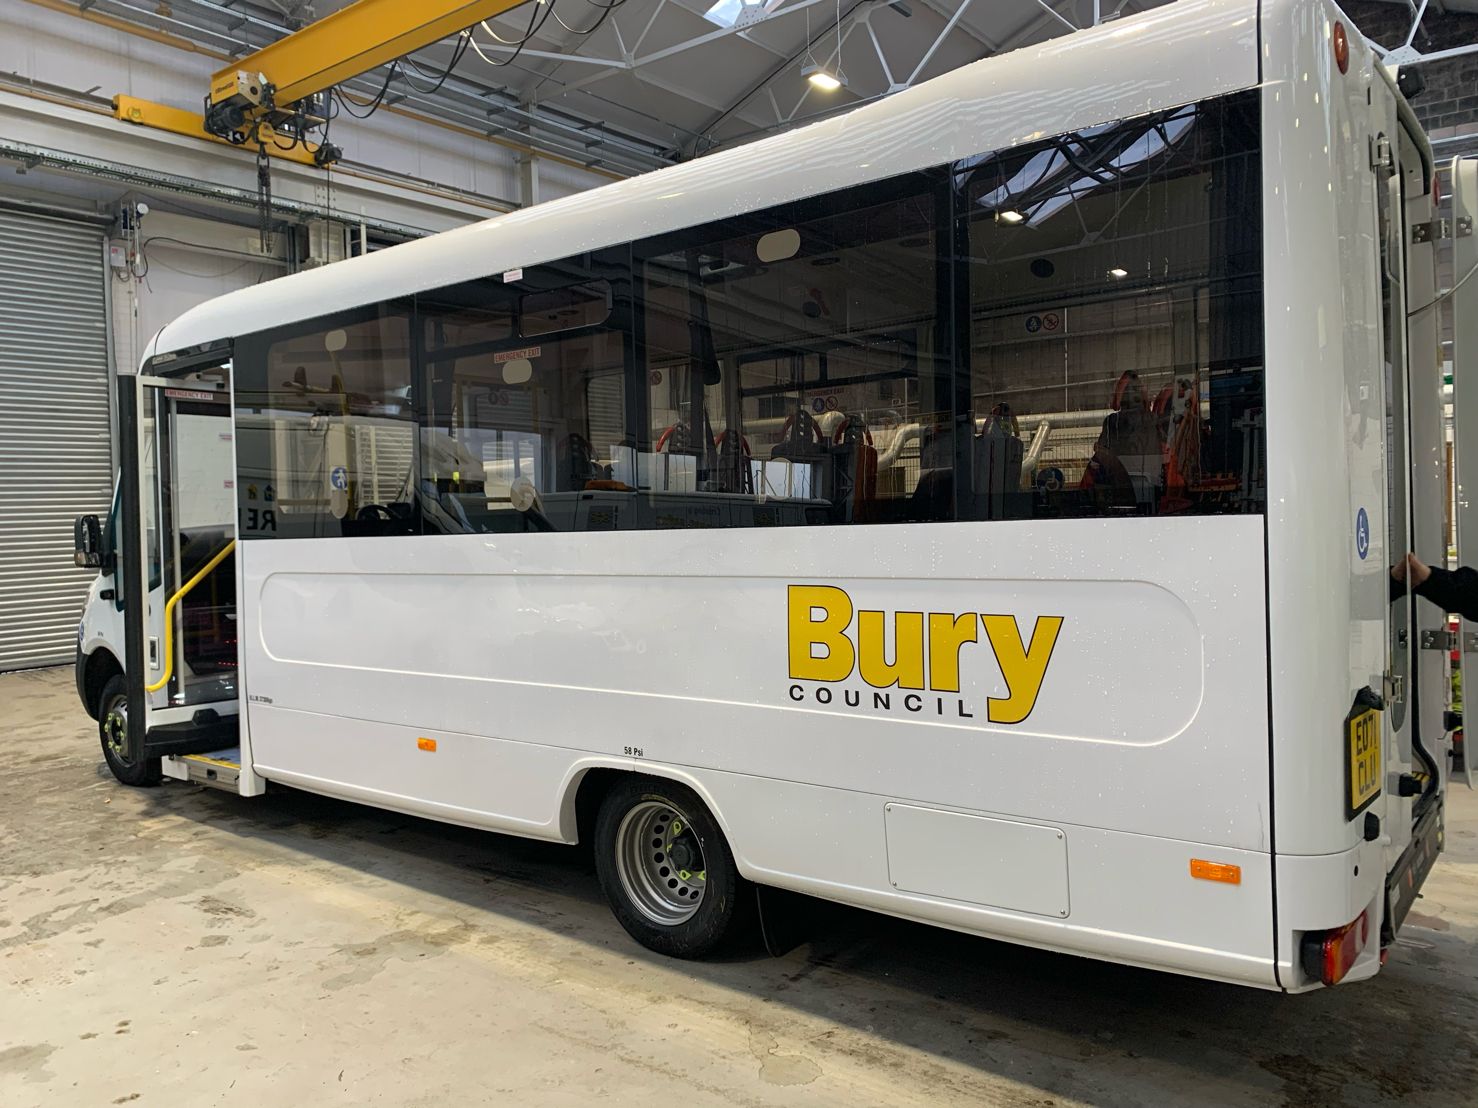 Bury Council takes delivery of 6 accessible mini buses via TPPL’s Rental Framework